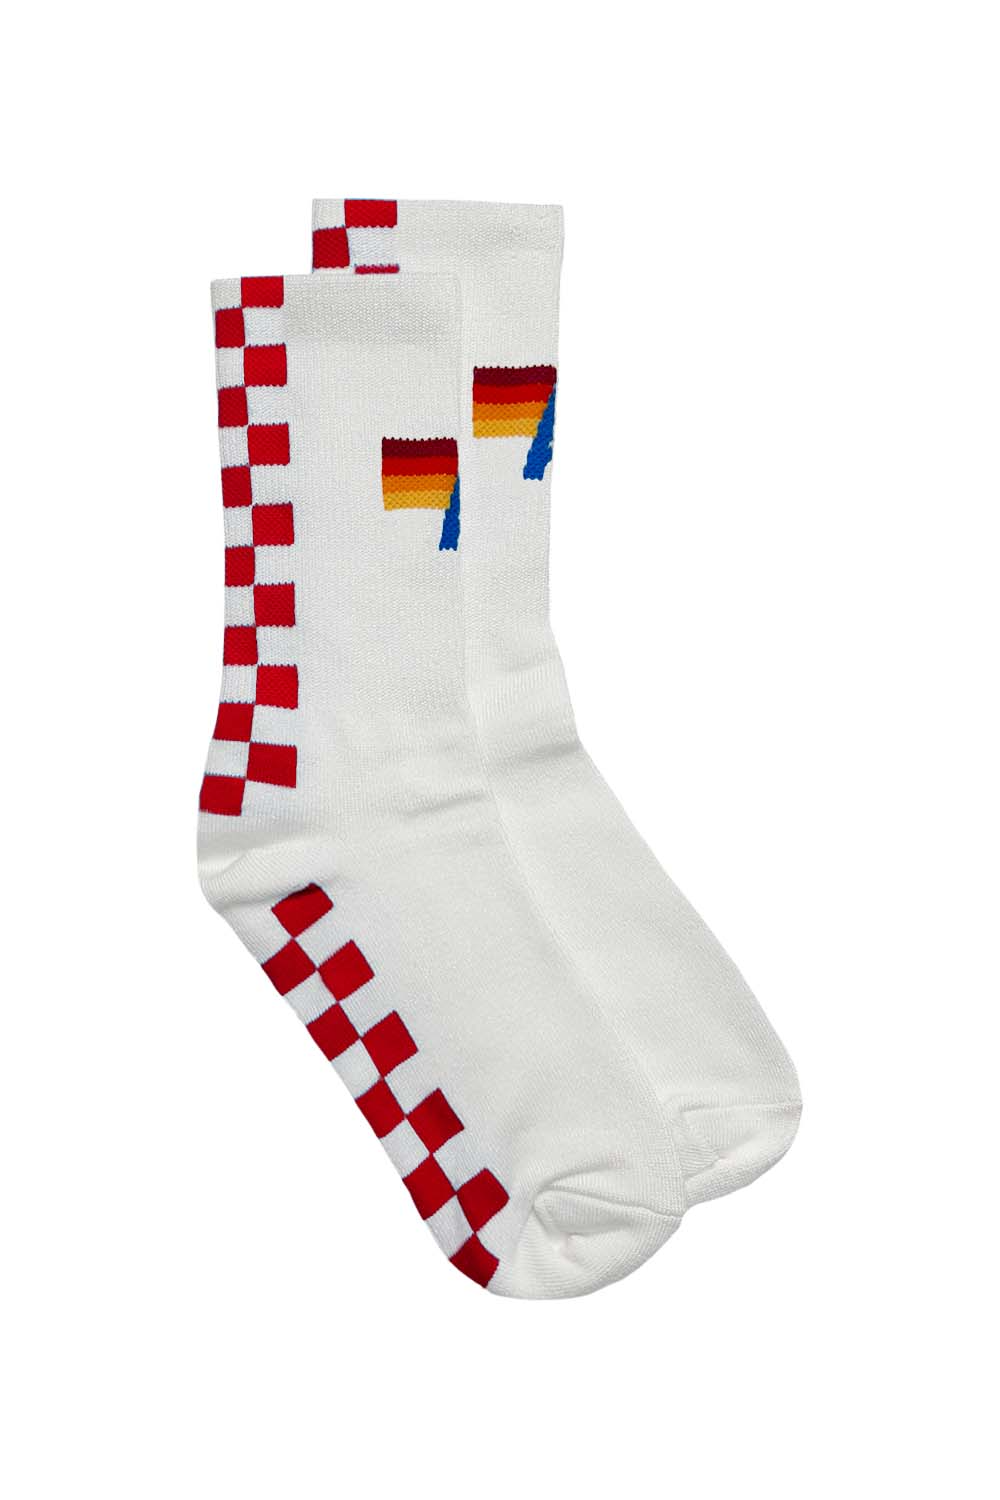 CHECKERED SOCK IN WHITE/RED - Romi Boutique